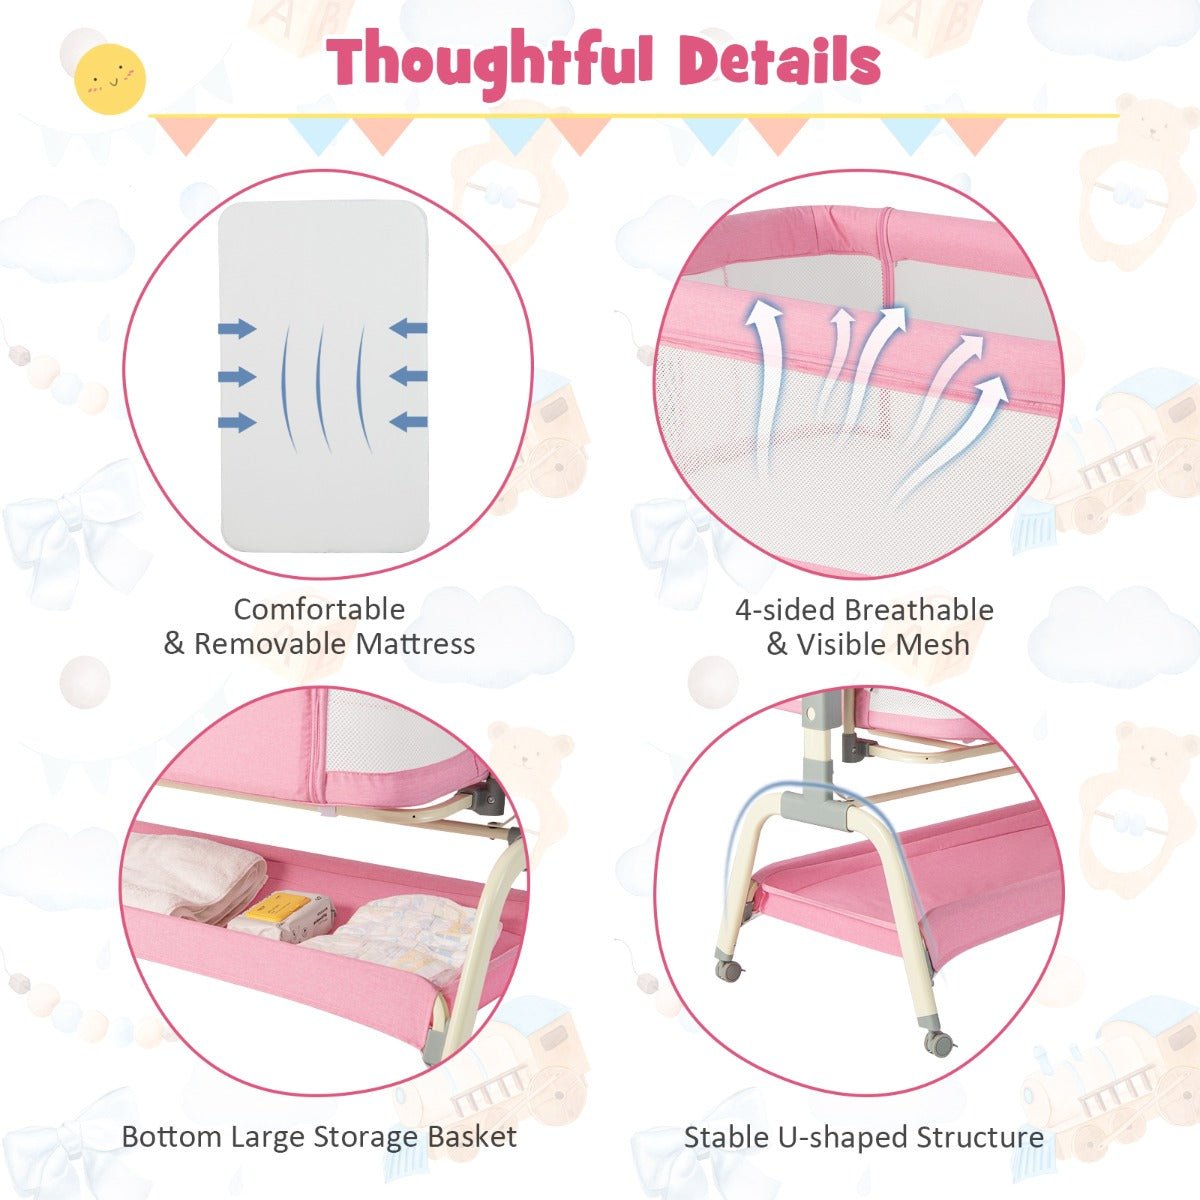 Get Travel-Ready: Pink 3-in-1 Travel Cot with Multiple Functions